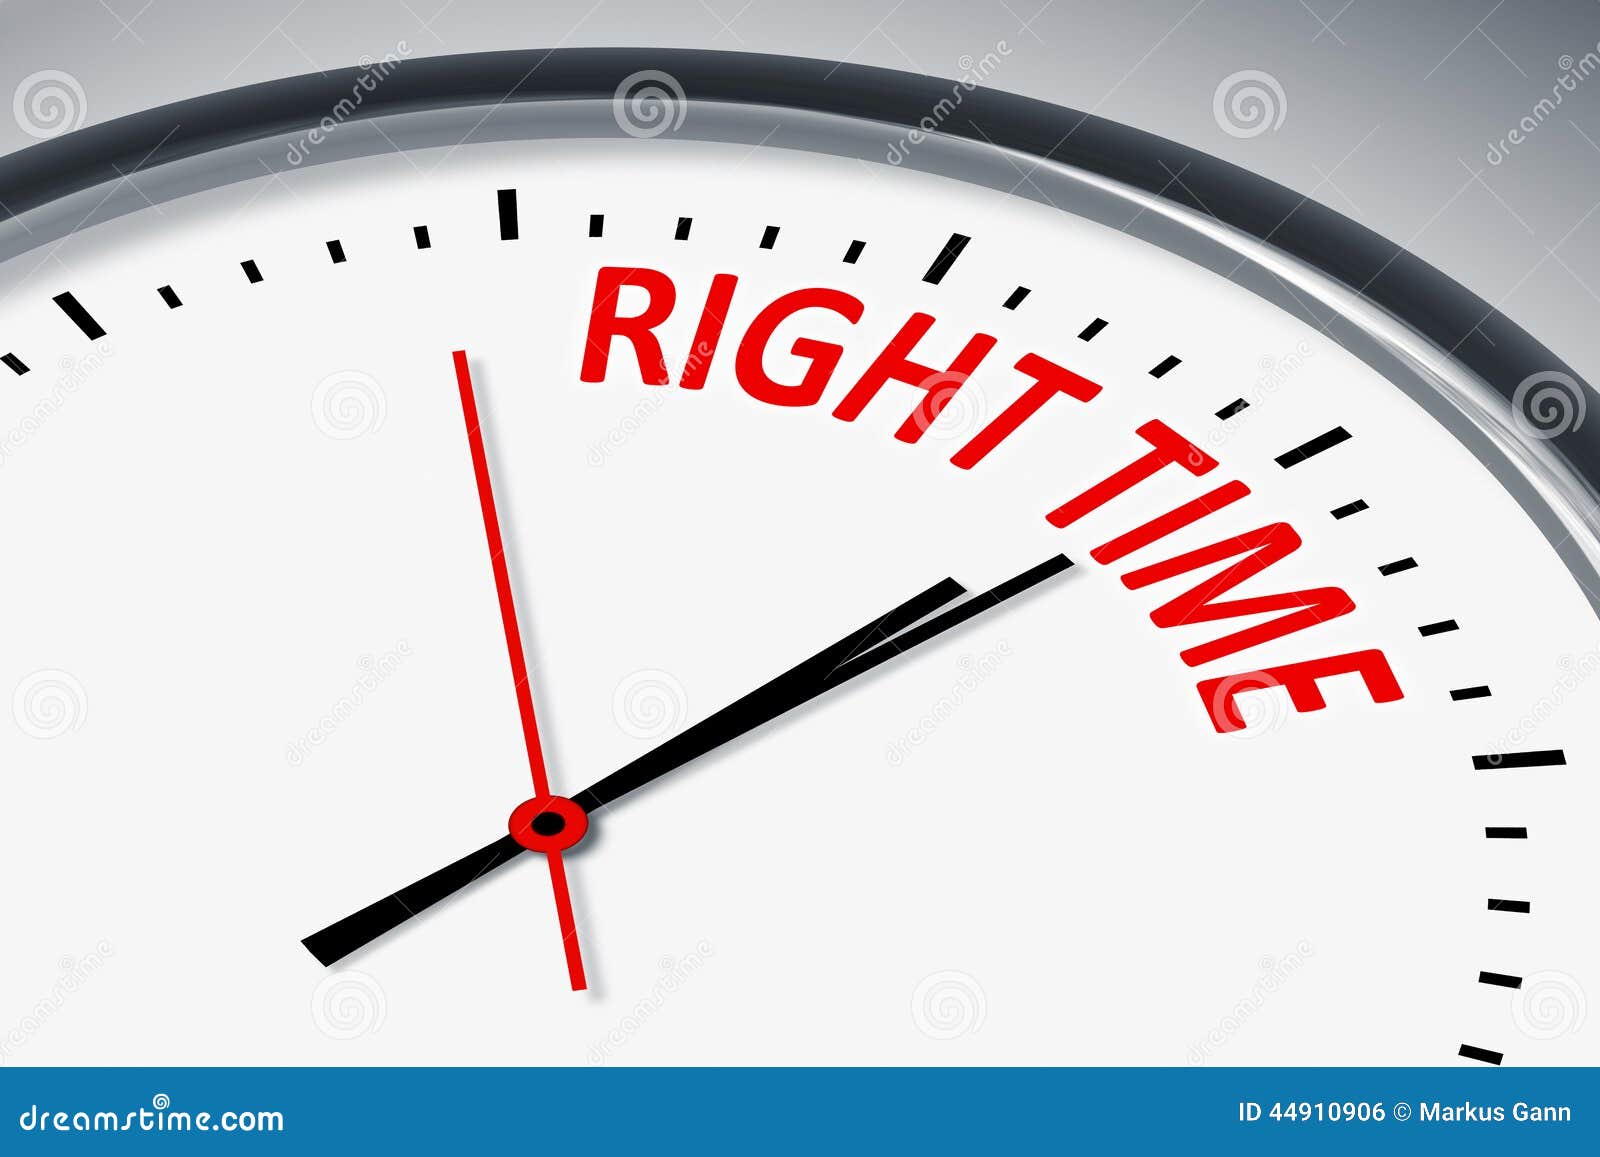 Image result for right time